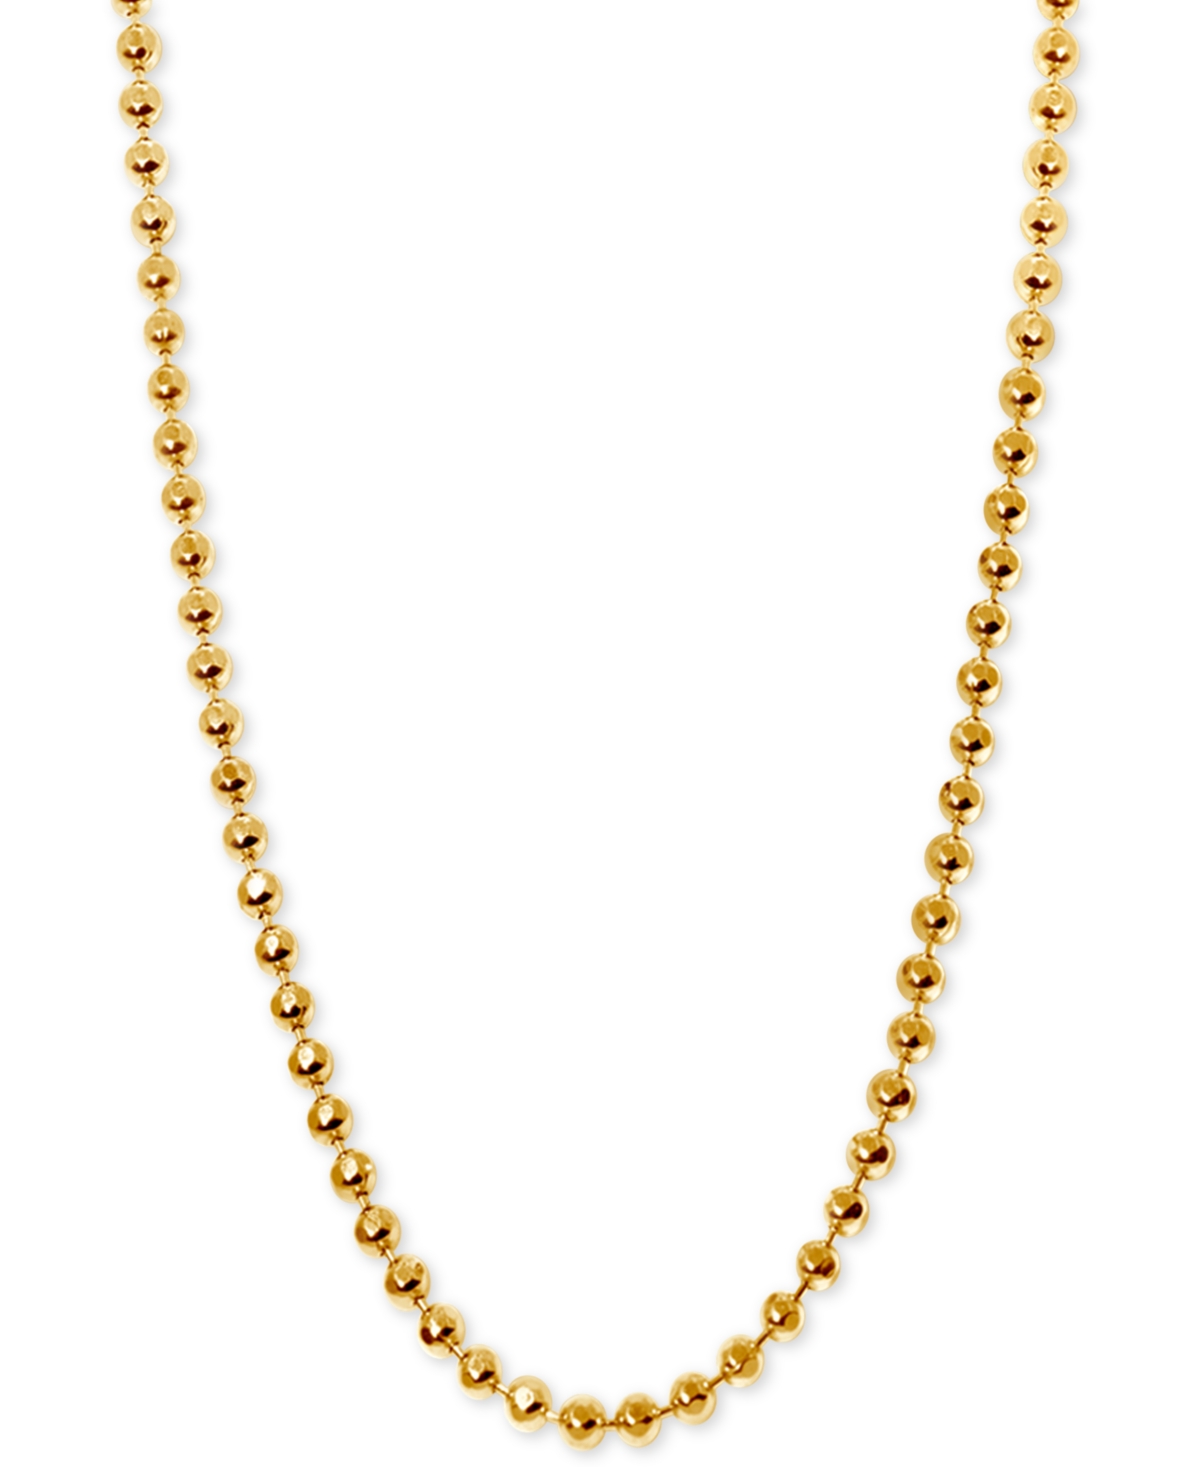 Alex Woo Beaded 18" Chain Necklace in 14k Gold